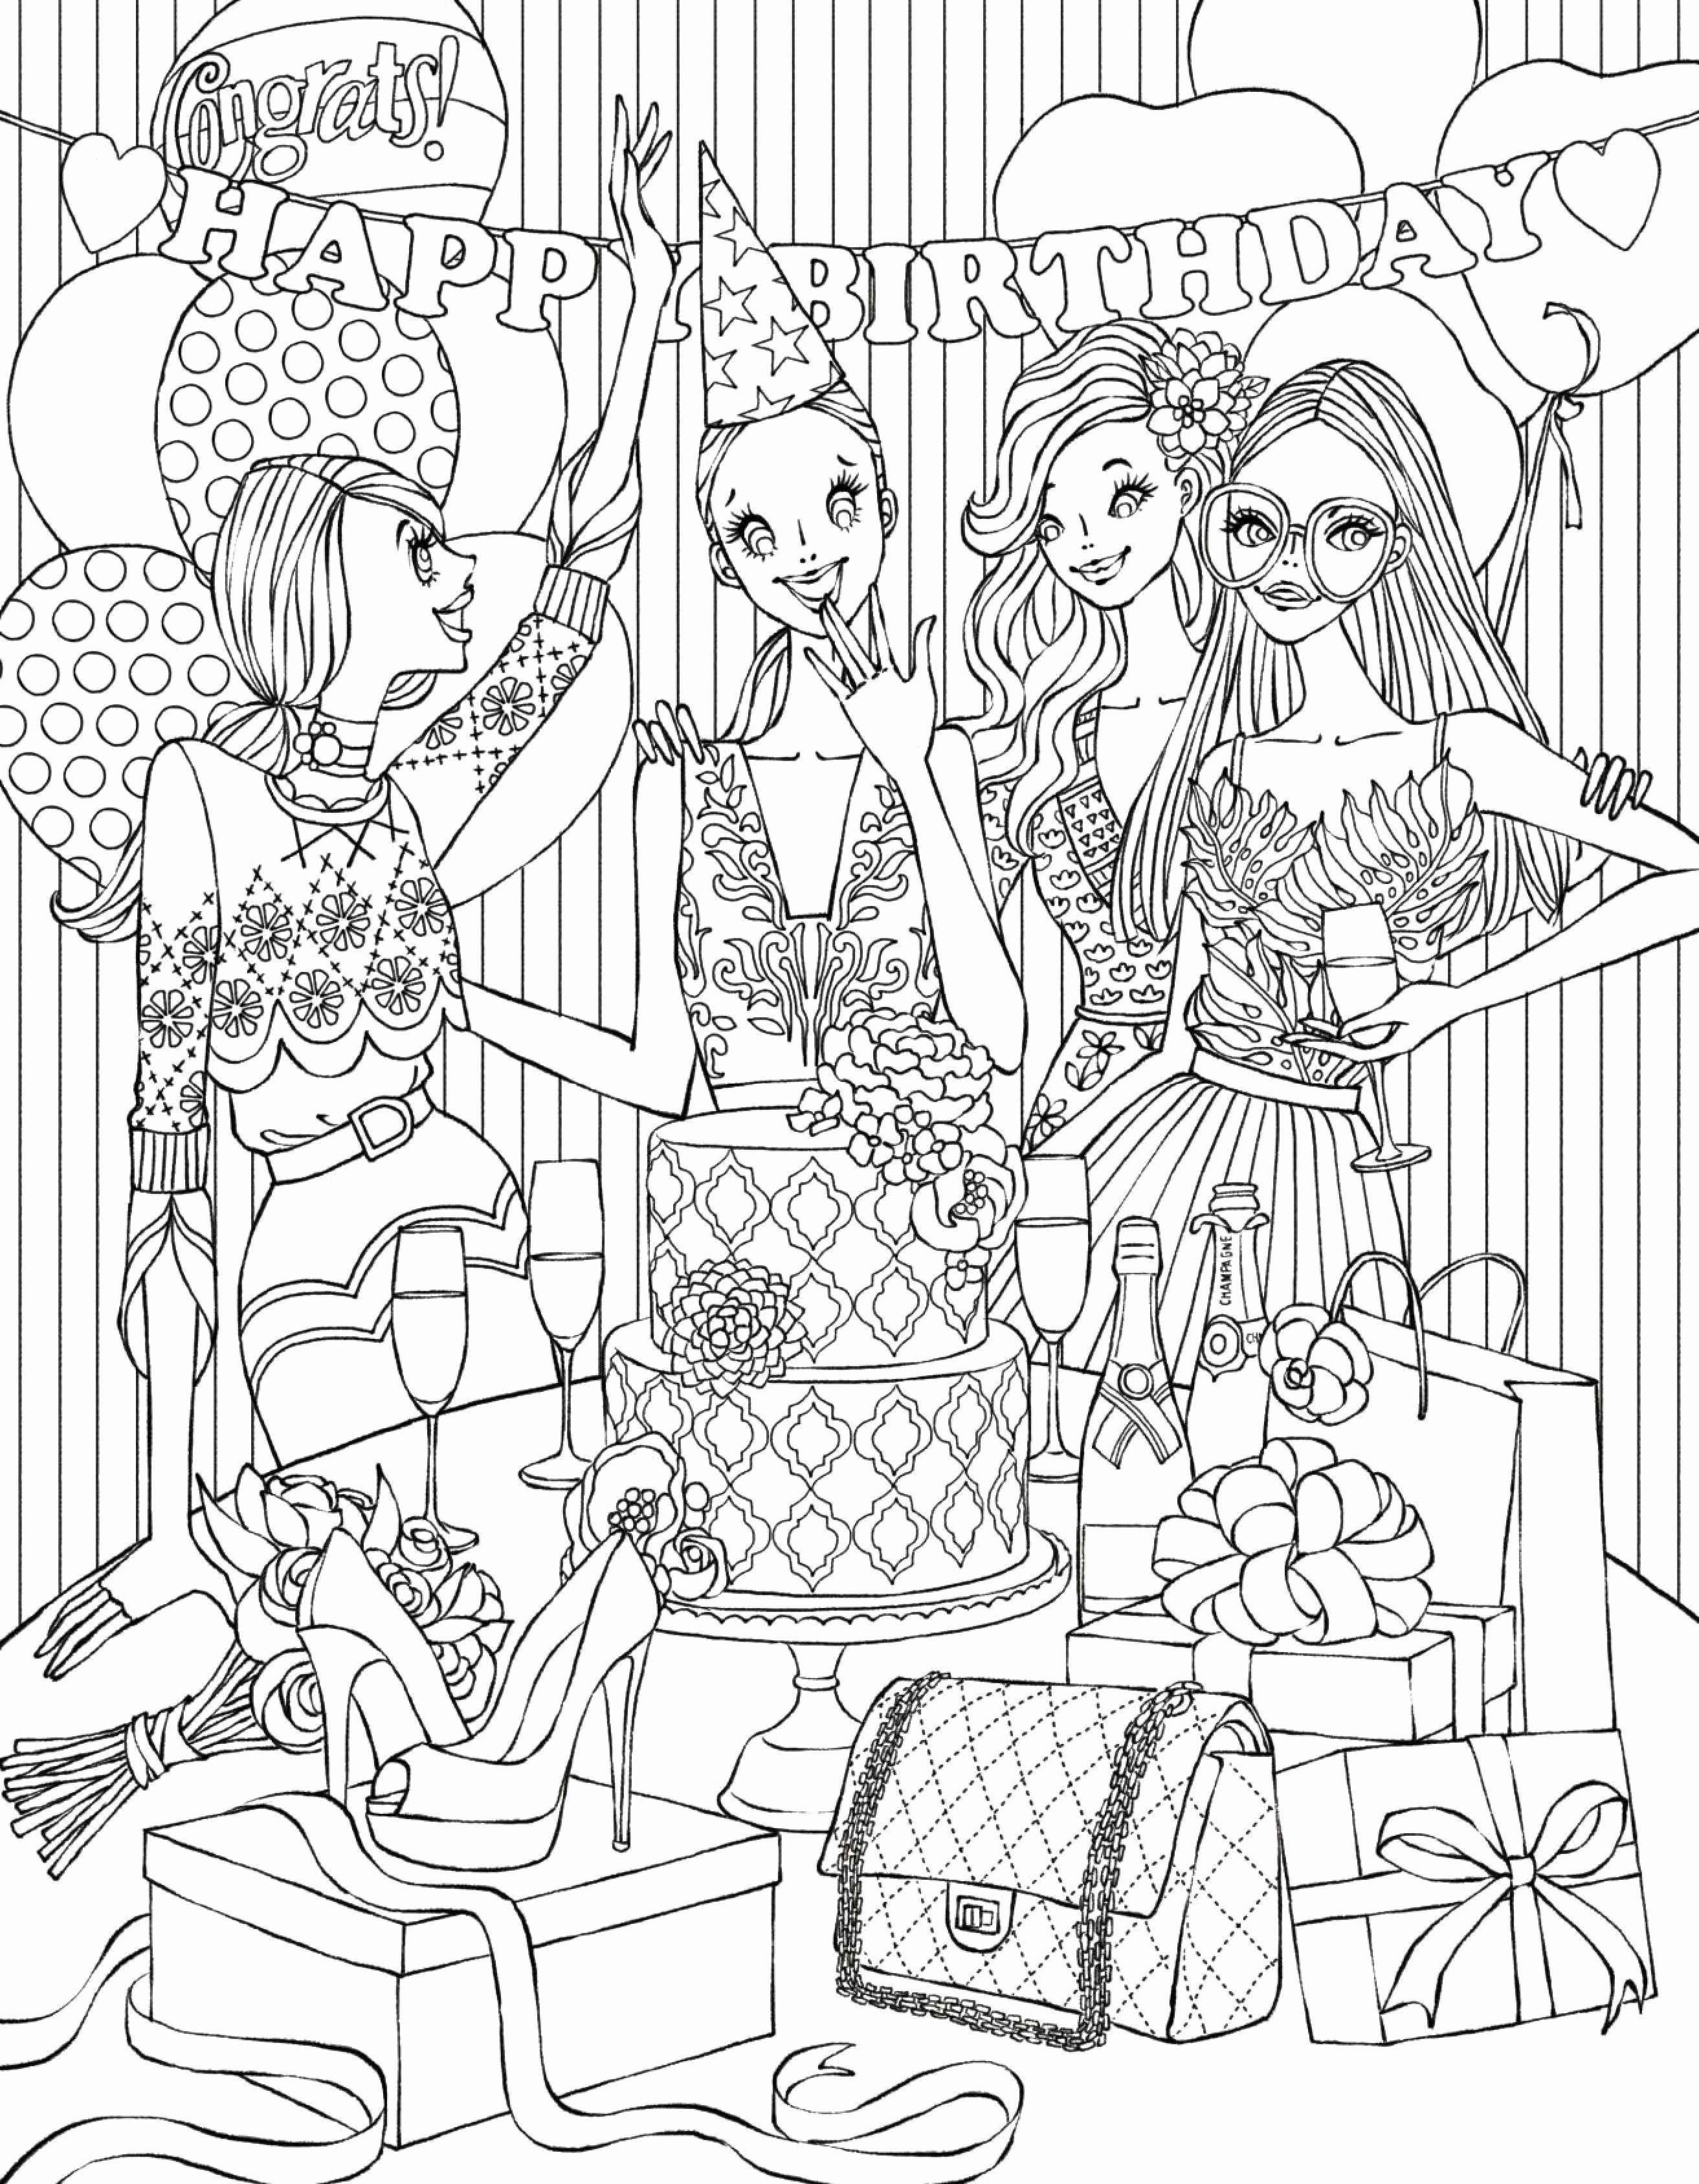 Miss You Coloring Pages at GetColorings.com | Free printable colorings